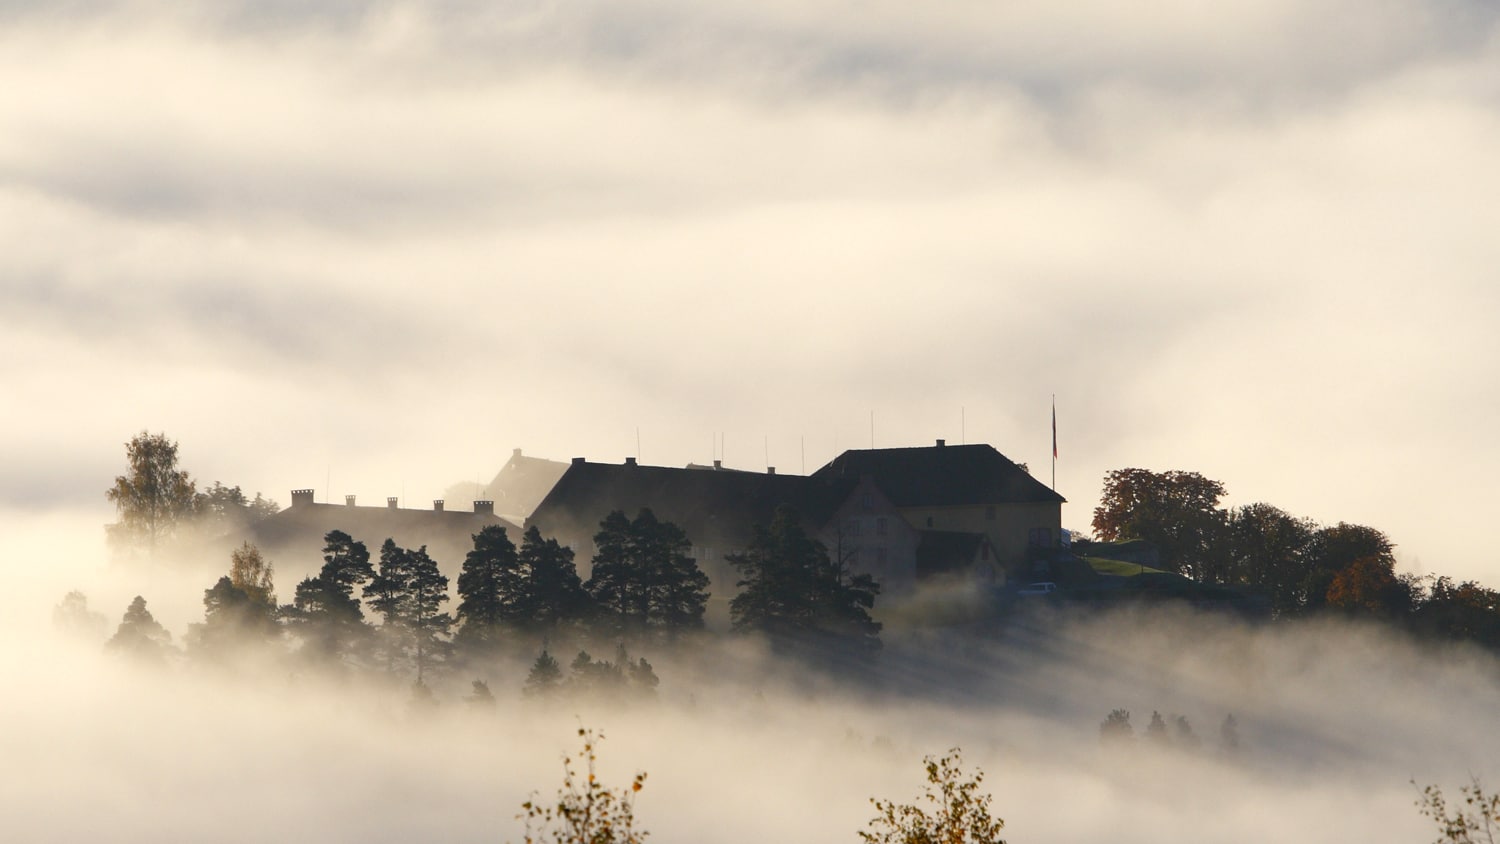 The fortress of Kongsvinger covered in mist.